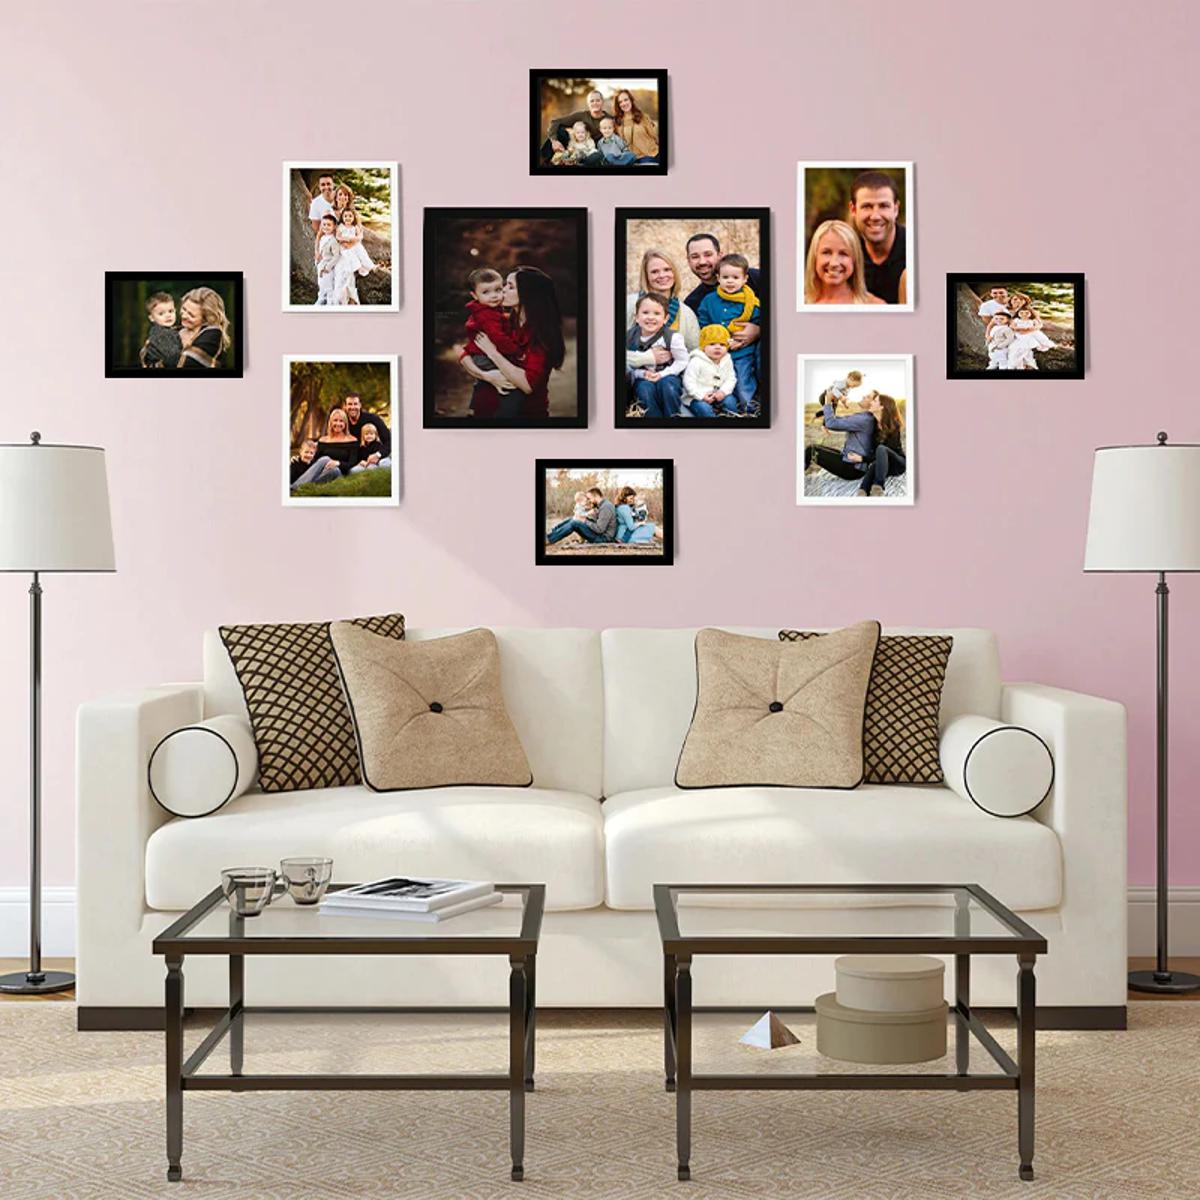 Collage Wall Photo Frame Set of 10 for Home Decor (2 Units of 10 X 14", 4 Units of 8x10", 4 Unit of 6×8 inches)